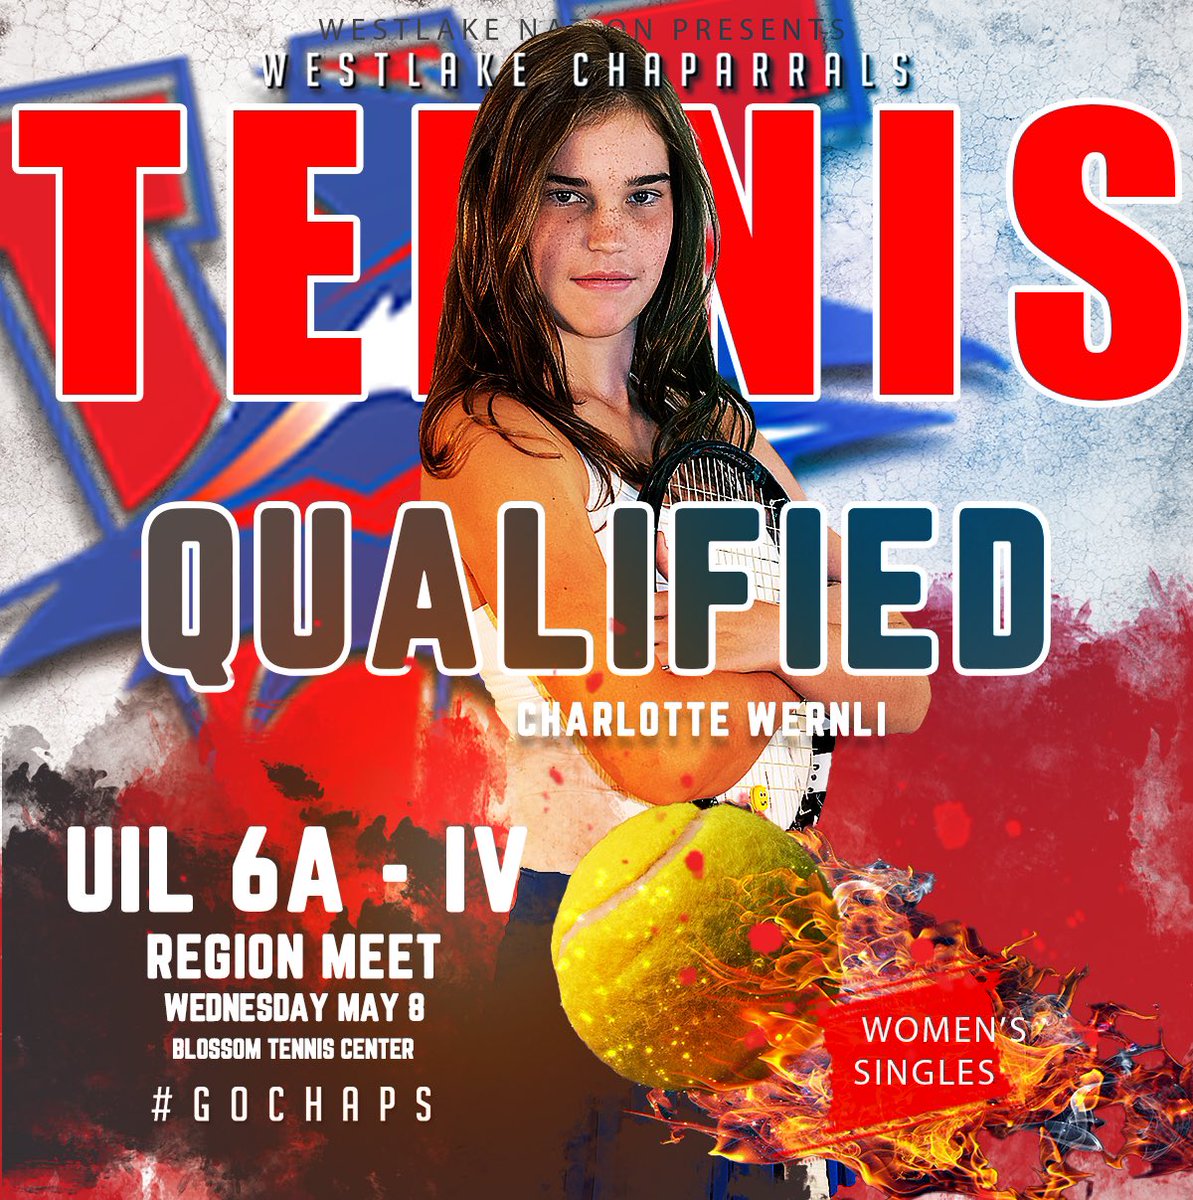 Charlotte Wernli is in the draw in Women’s Singles at Wednesday’s Region IV Tennis Tournament. All matches will be played at Blossom Tennis Center in San Antonio. Good luck, Charlotte. #GoChaps